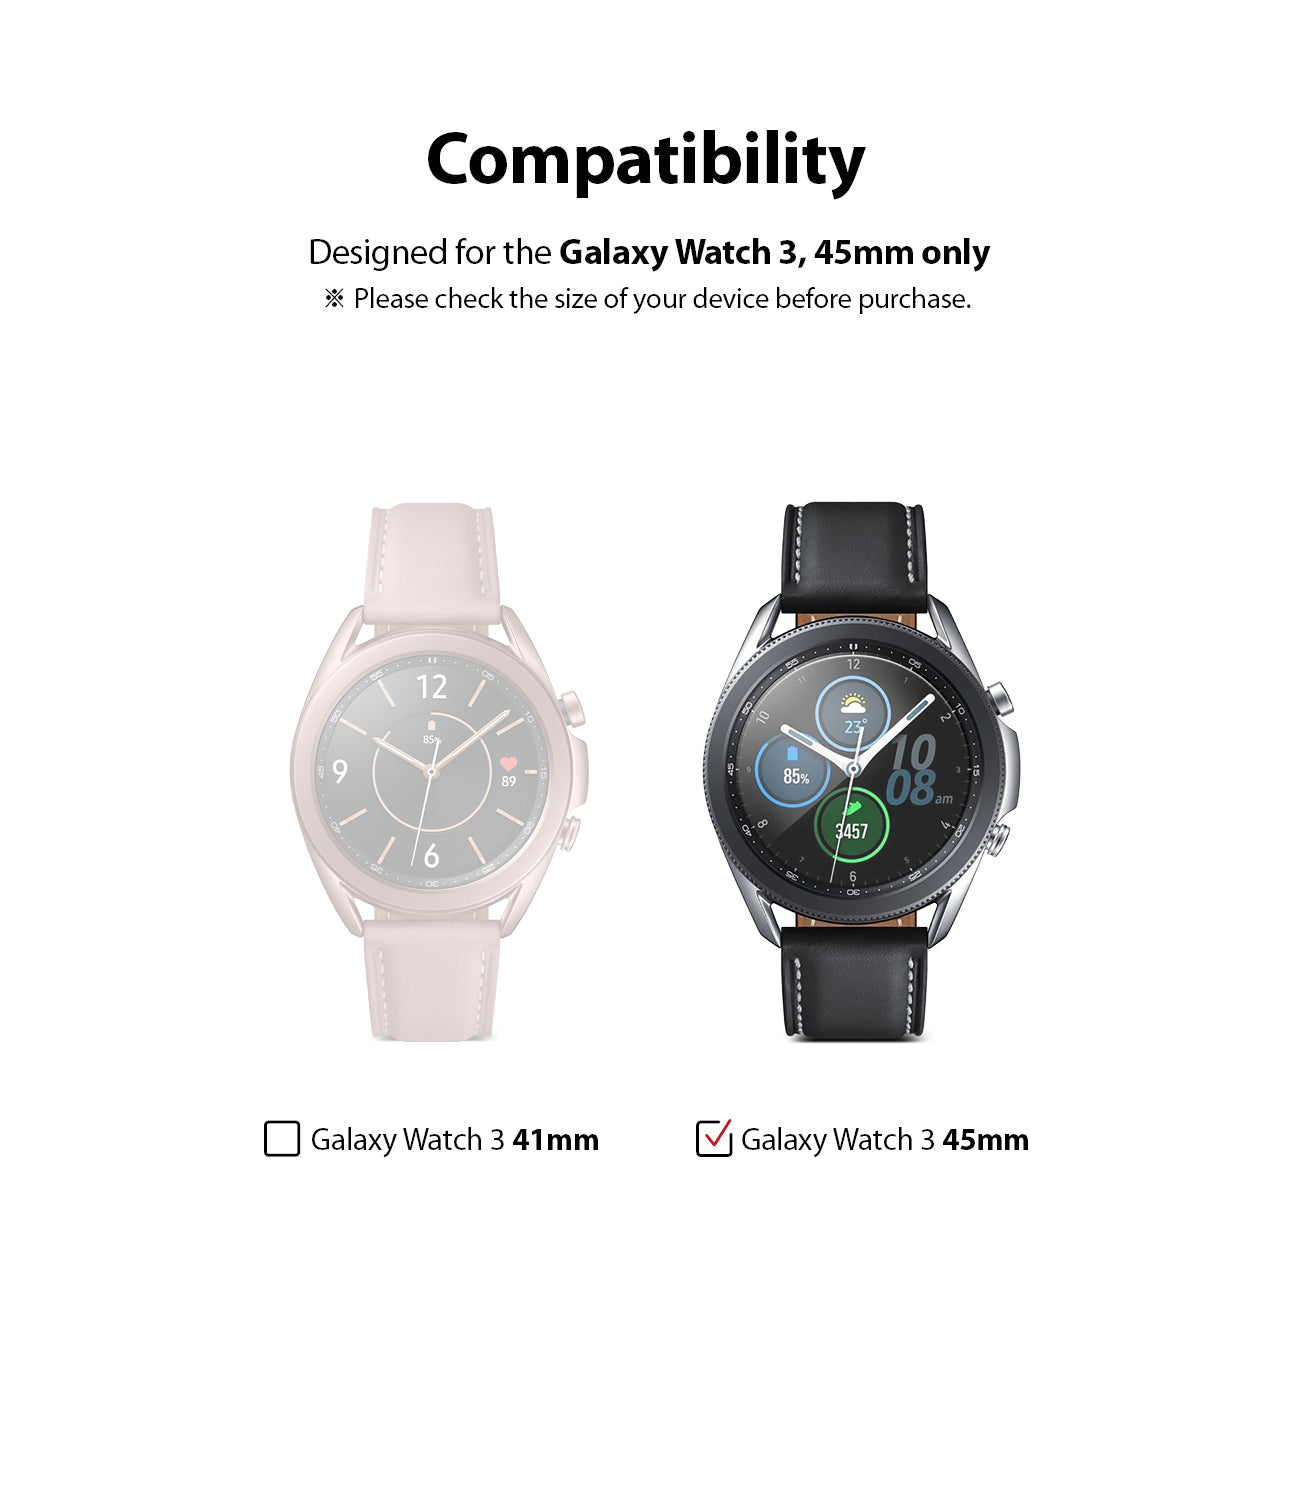 compatible with galaxy watch 3 45mm only